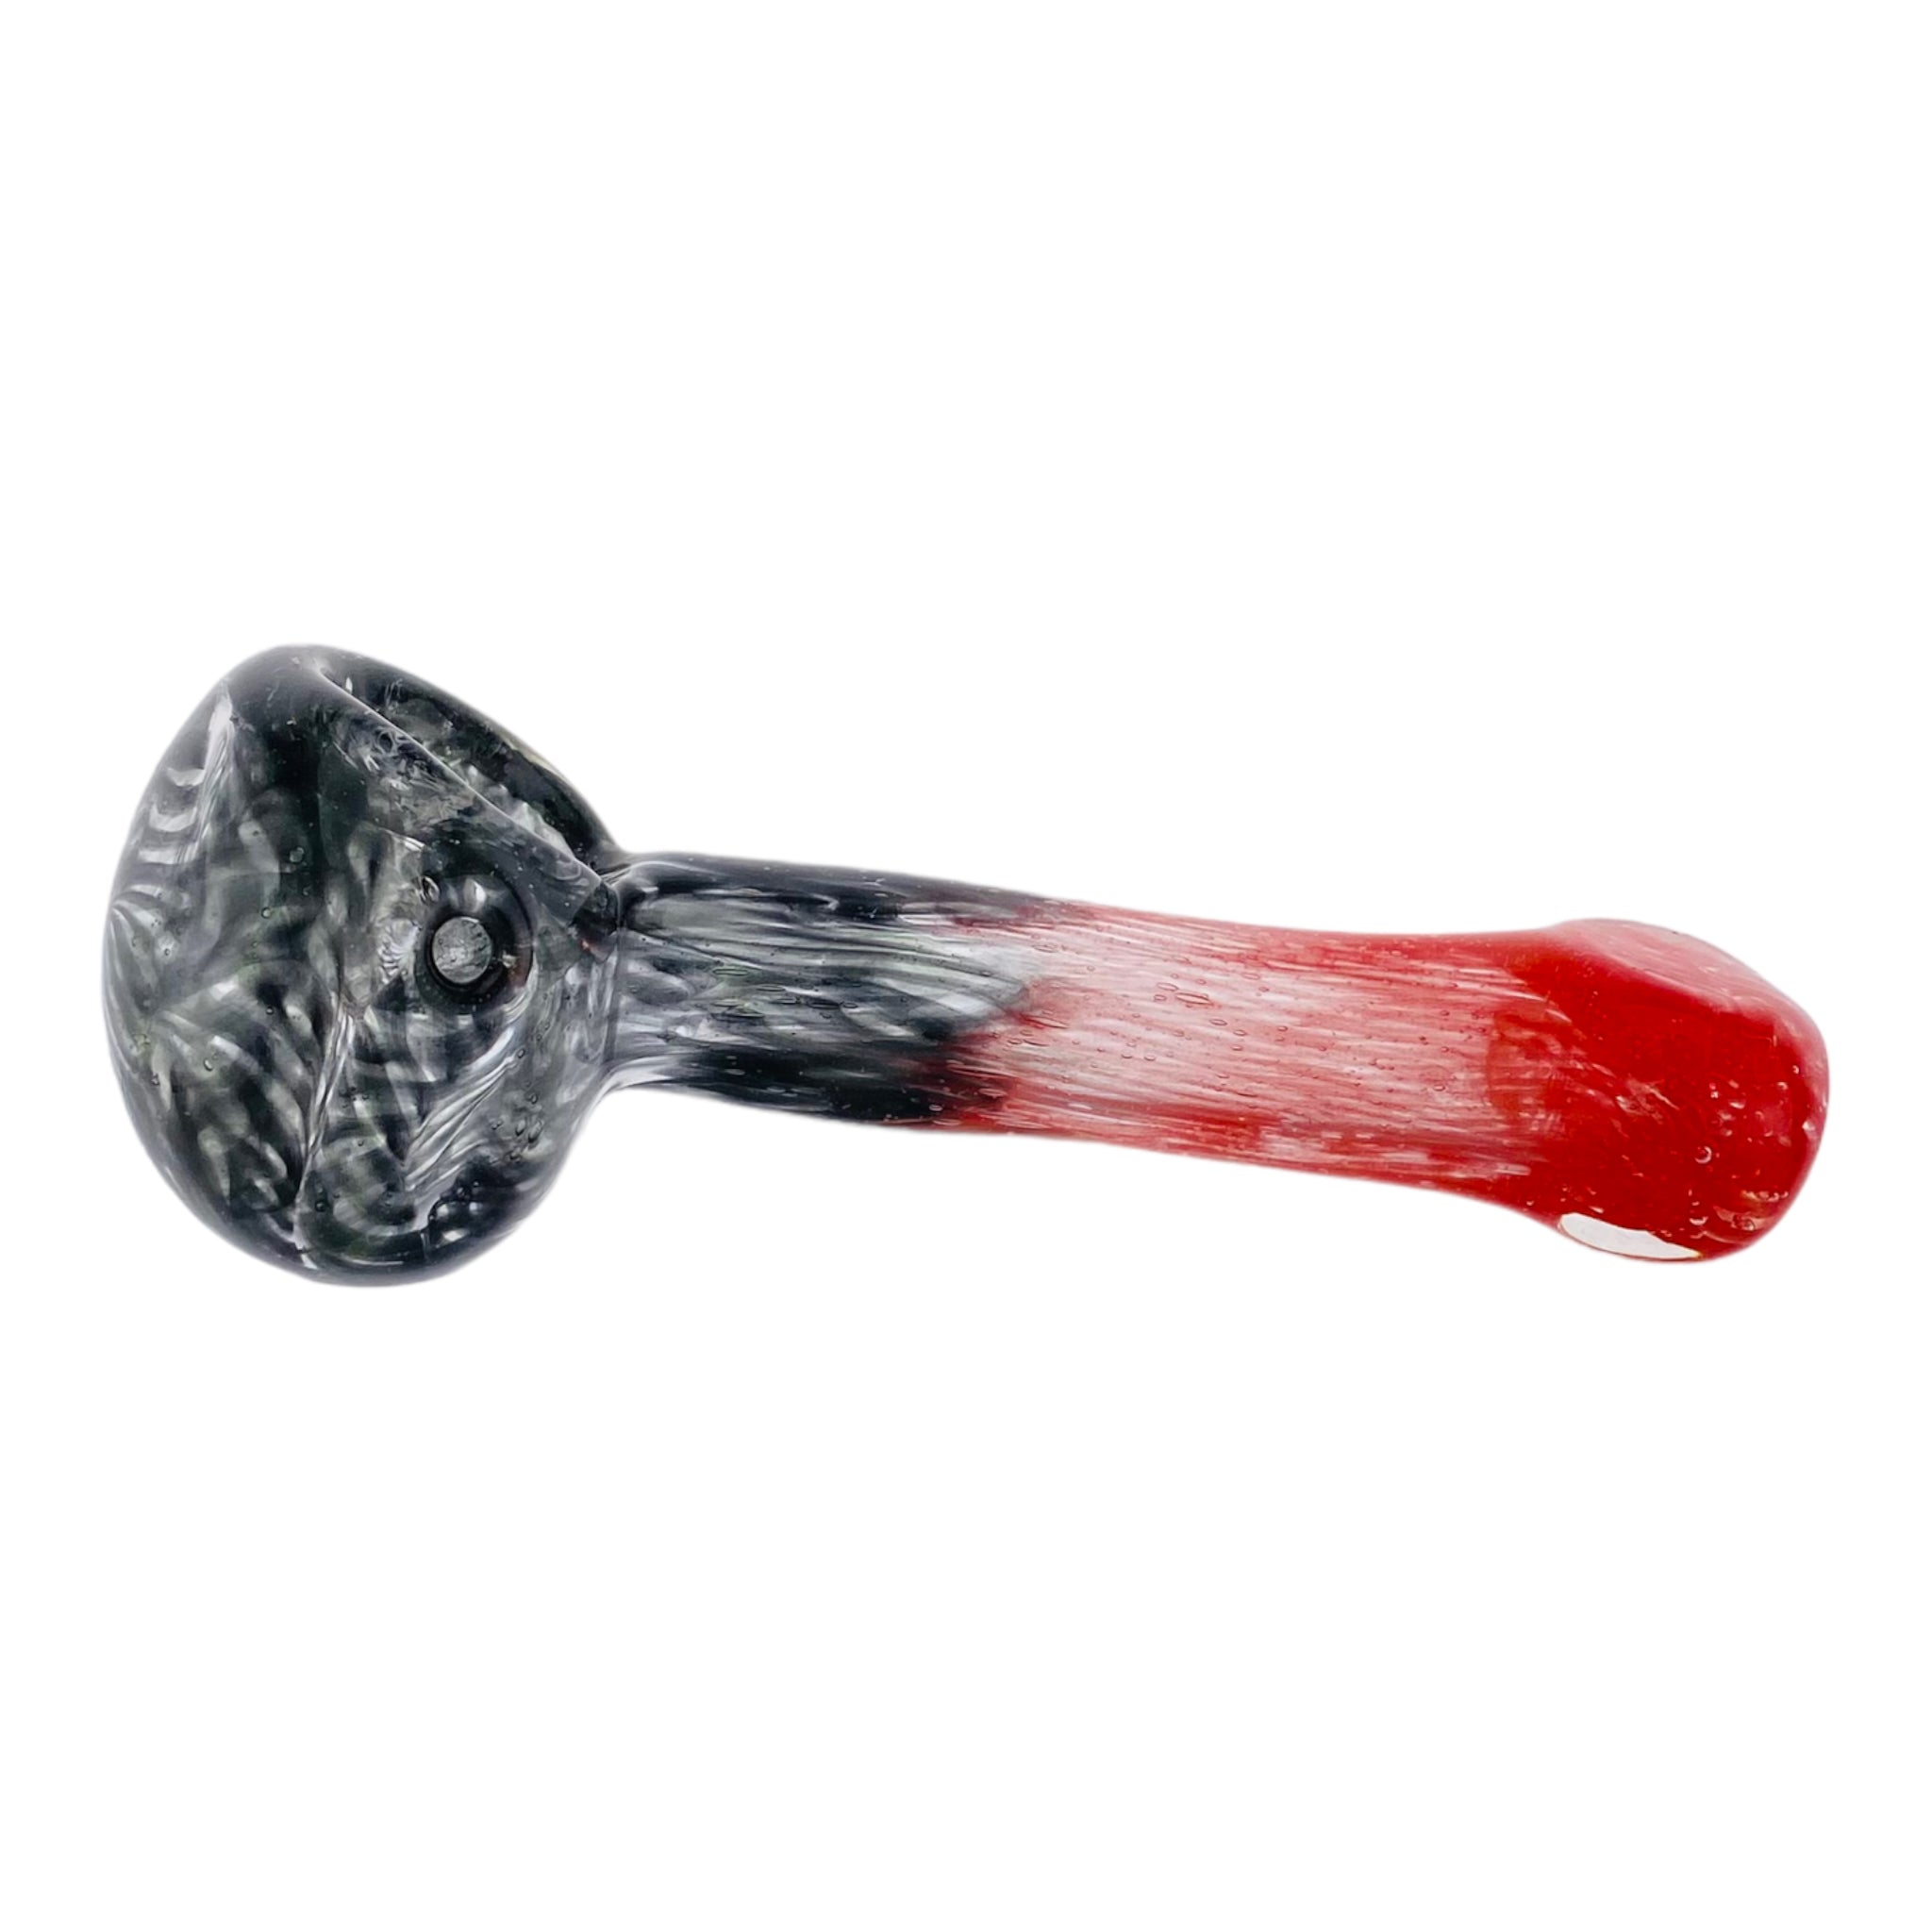 Basic Glass Spoon Pipe With Red And Black Spiral Color Twist